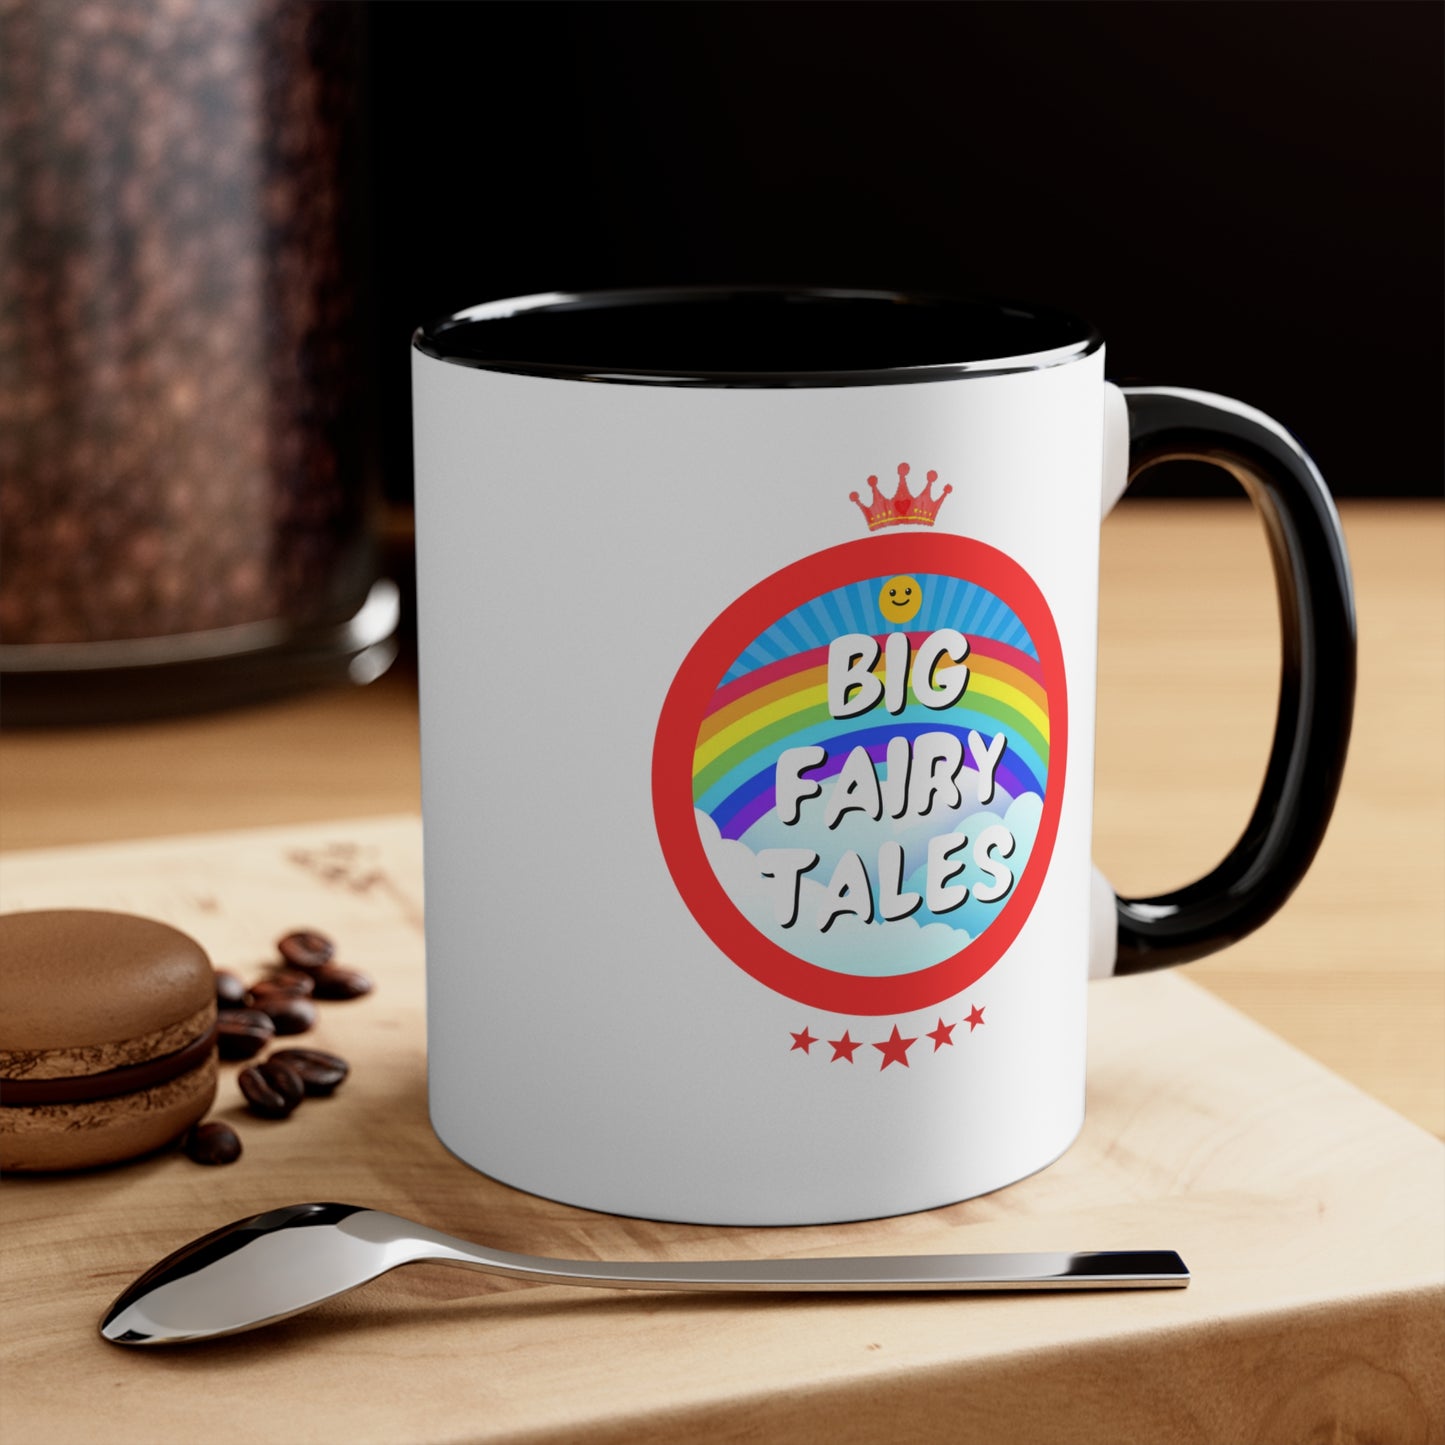 Big Fairy Tales By Schatar Rainbow Dreamscape: The Mug Of Whimsy For Dreamers - 11oz